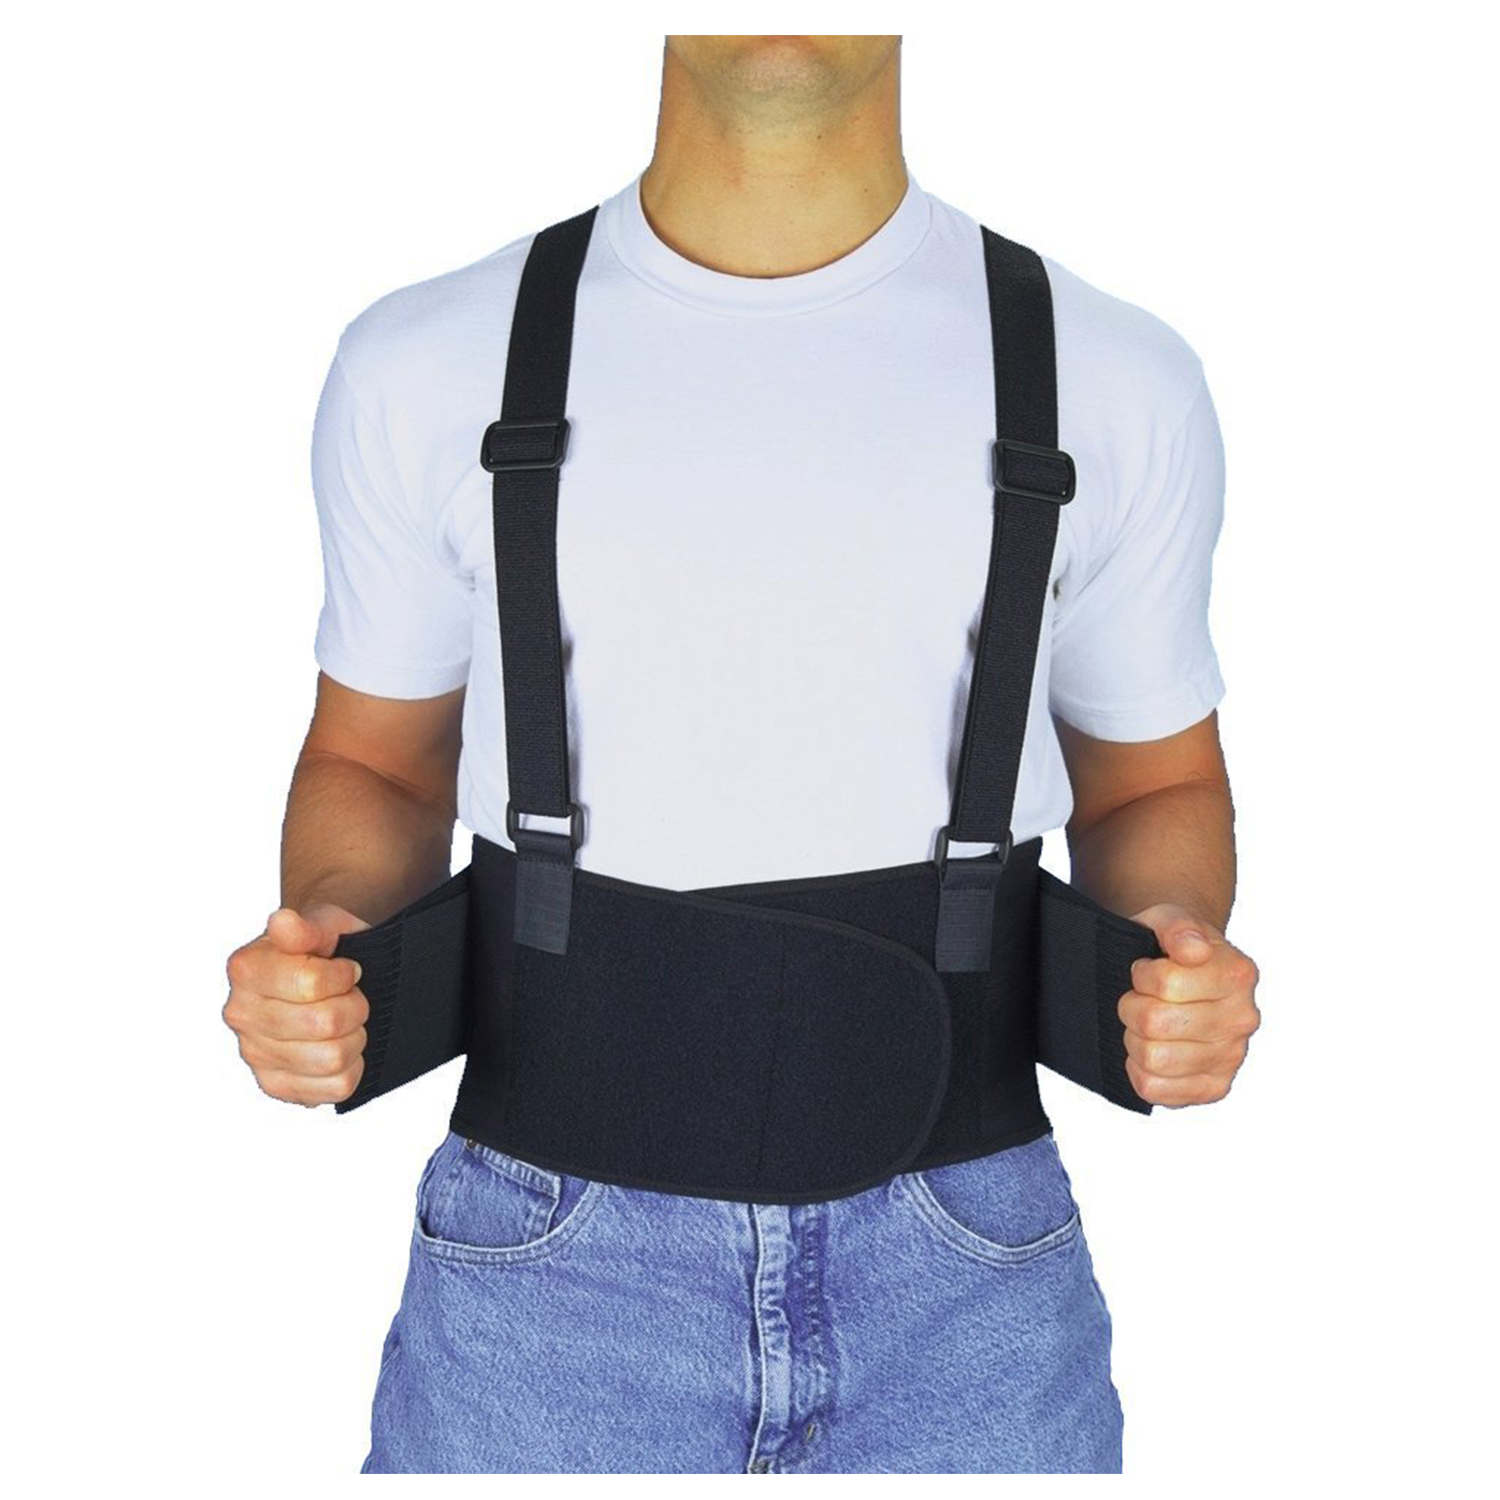 Adjustable Work Lumbar Back Support Belt With Detachable Suspenders For Back  Pain Relief, Injury Recovery, Heavy Lifting Support - Waist Support -  AliExpress